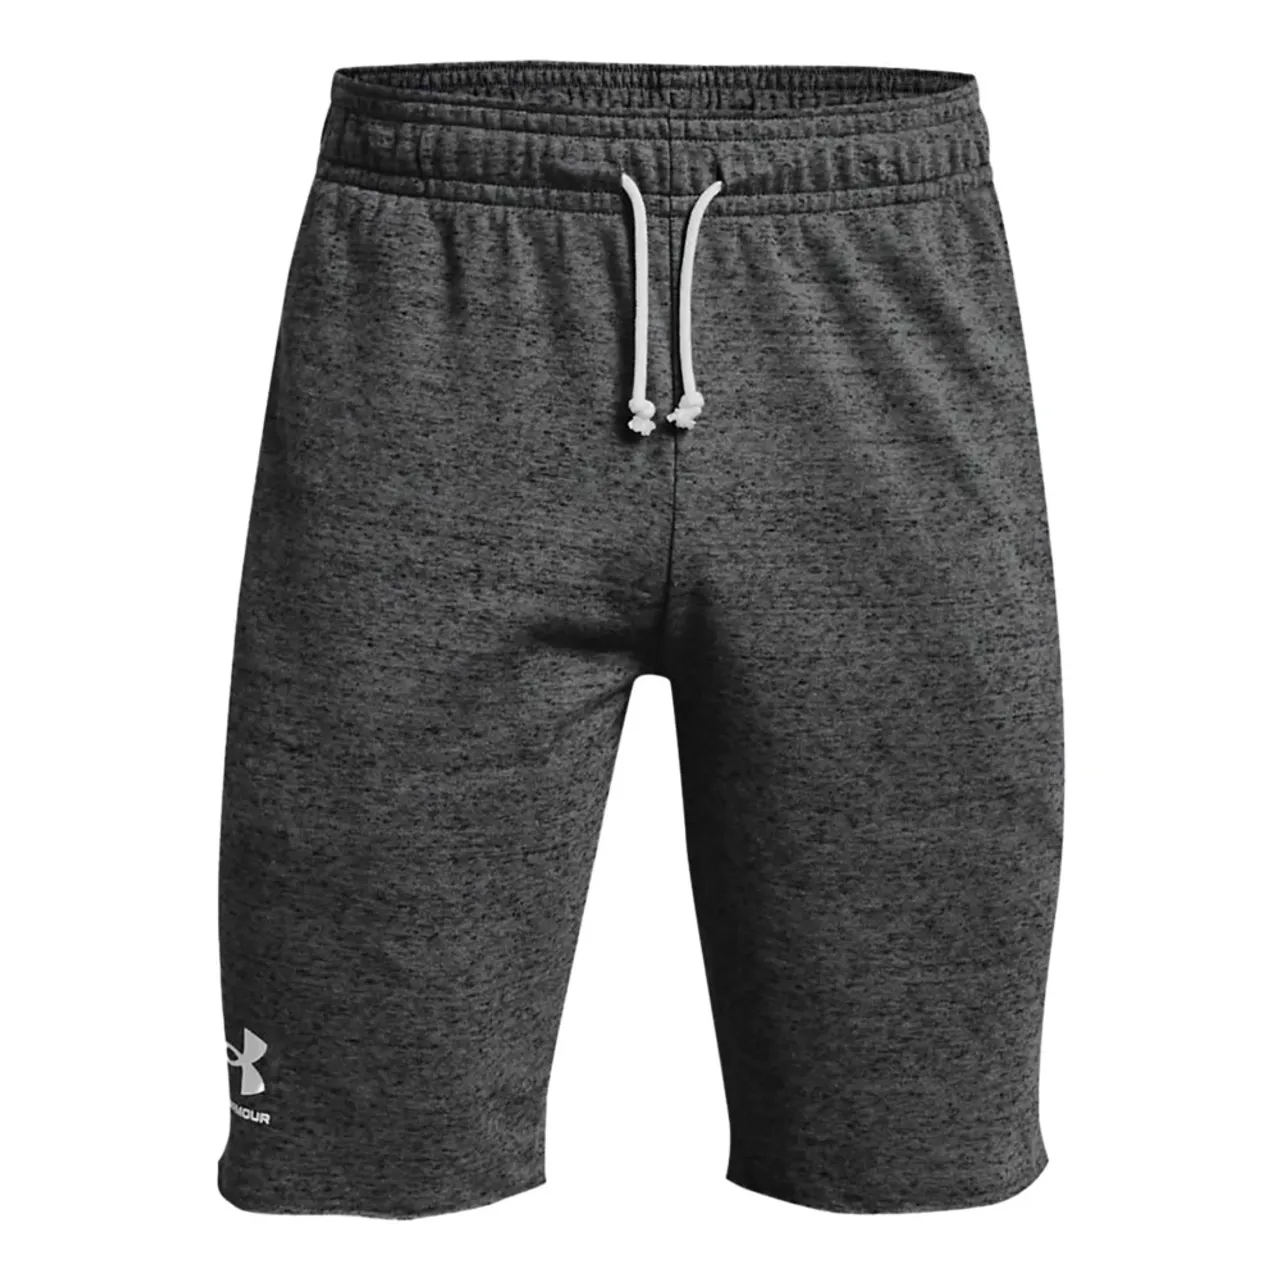 Under Armour - Shorts 